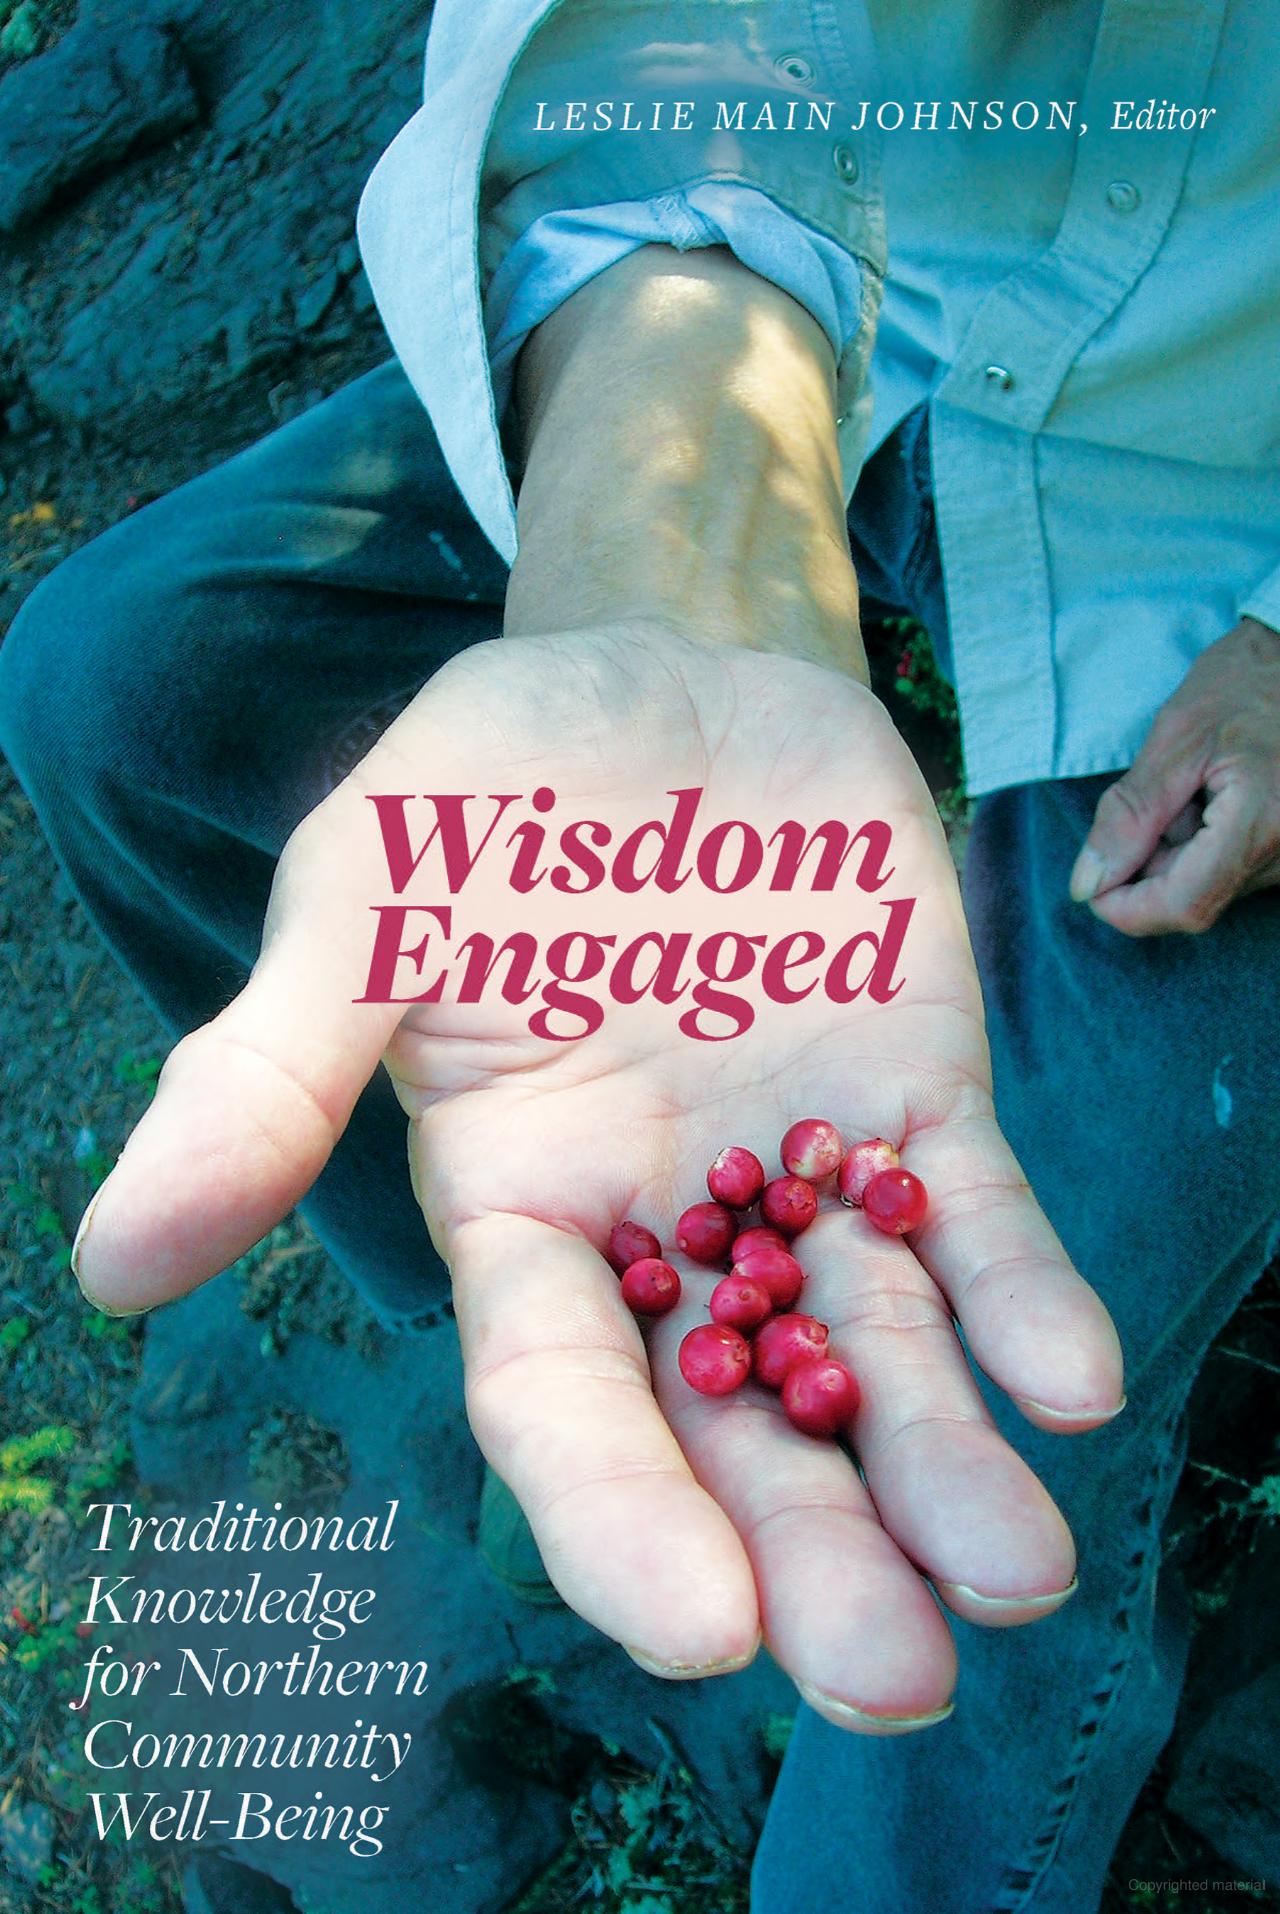 Wisdom Engaged: Traditional Knowledge for Northern Community Well-Being